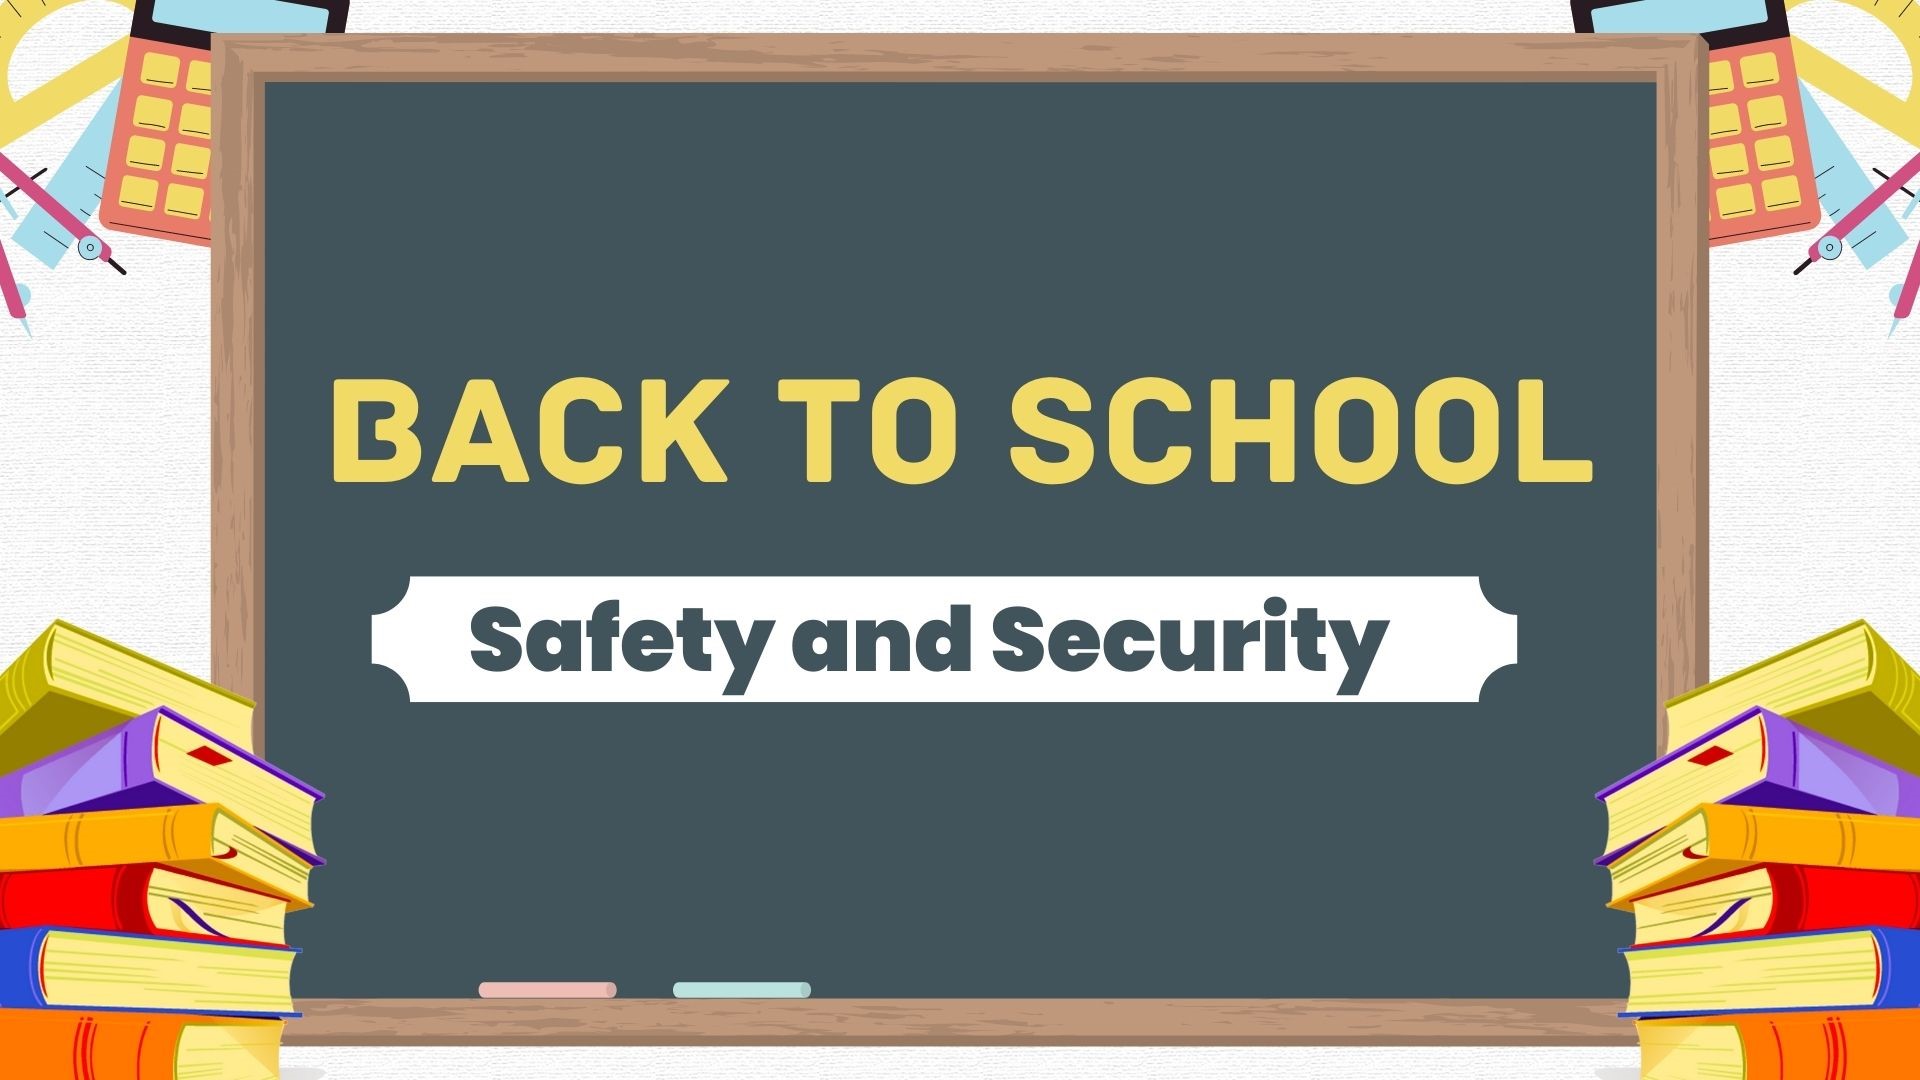 A look at what schools across the US are doing to keep kids safe in the school year ahead. This includes security updates like metal detectors and resource officers.